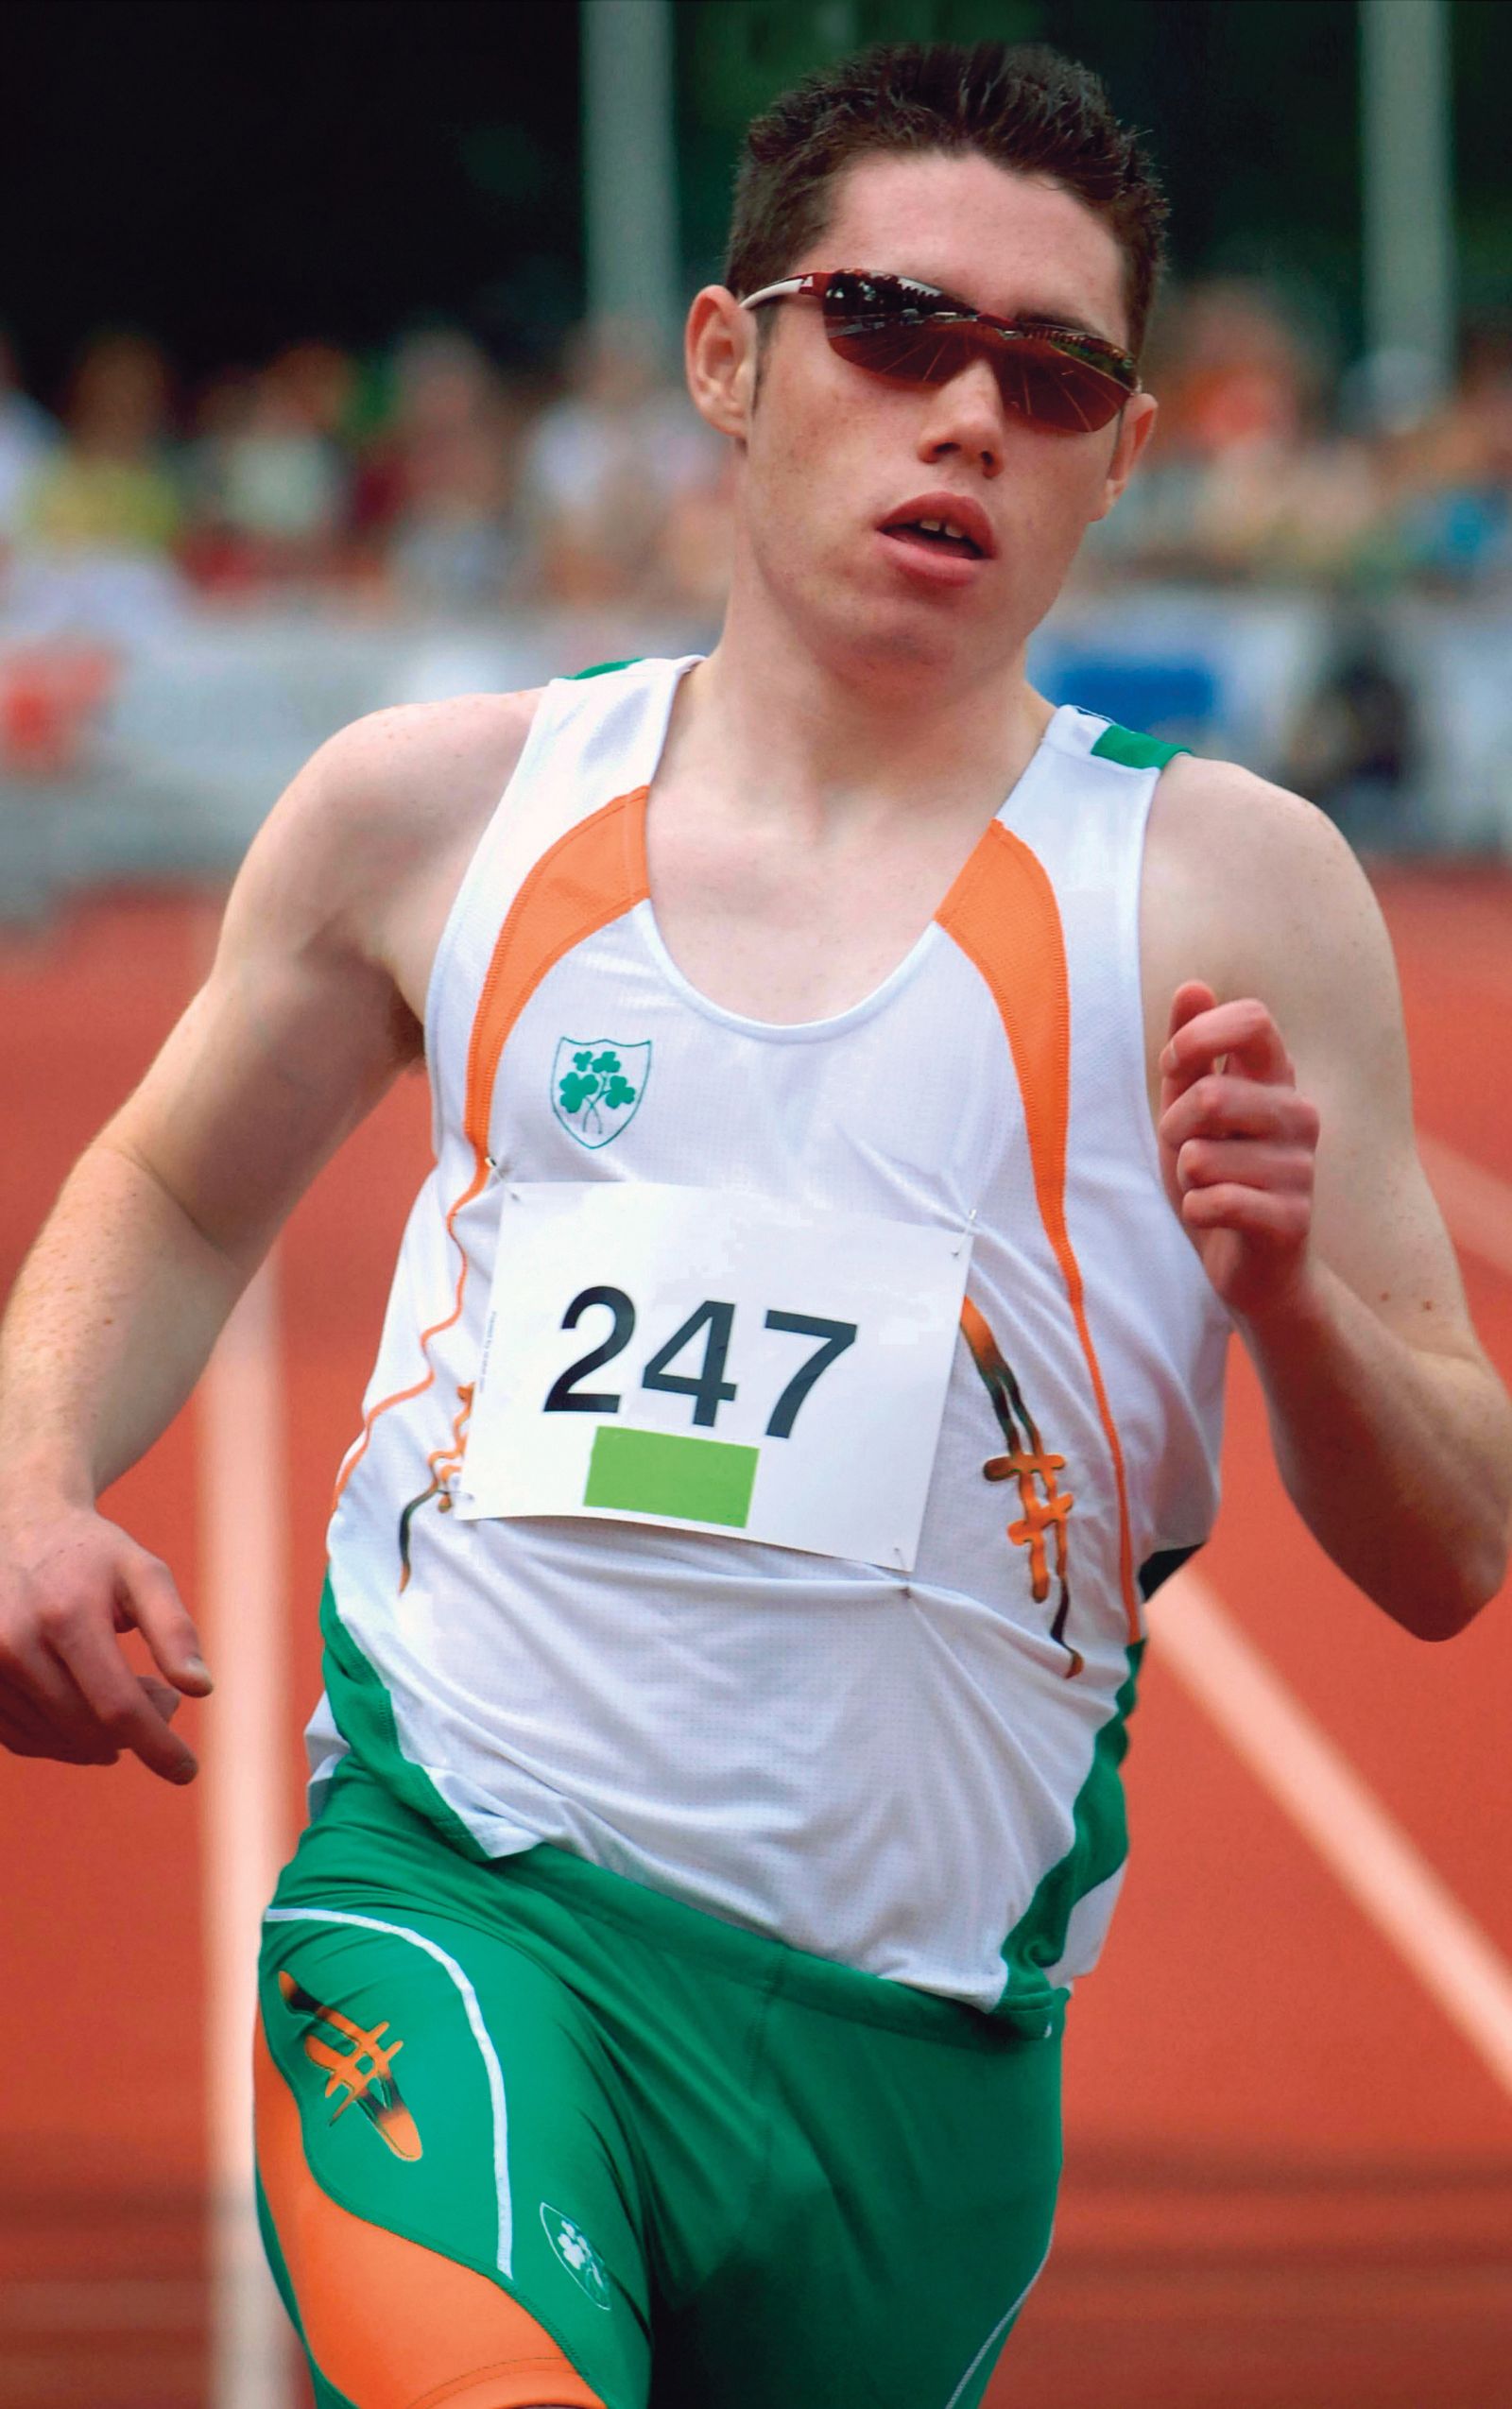 A photograph of a runner competing in a race.